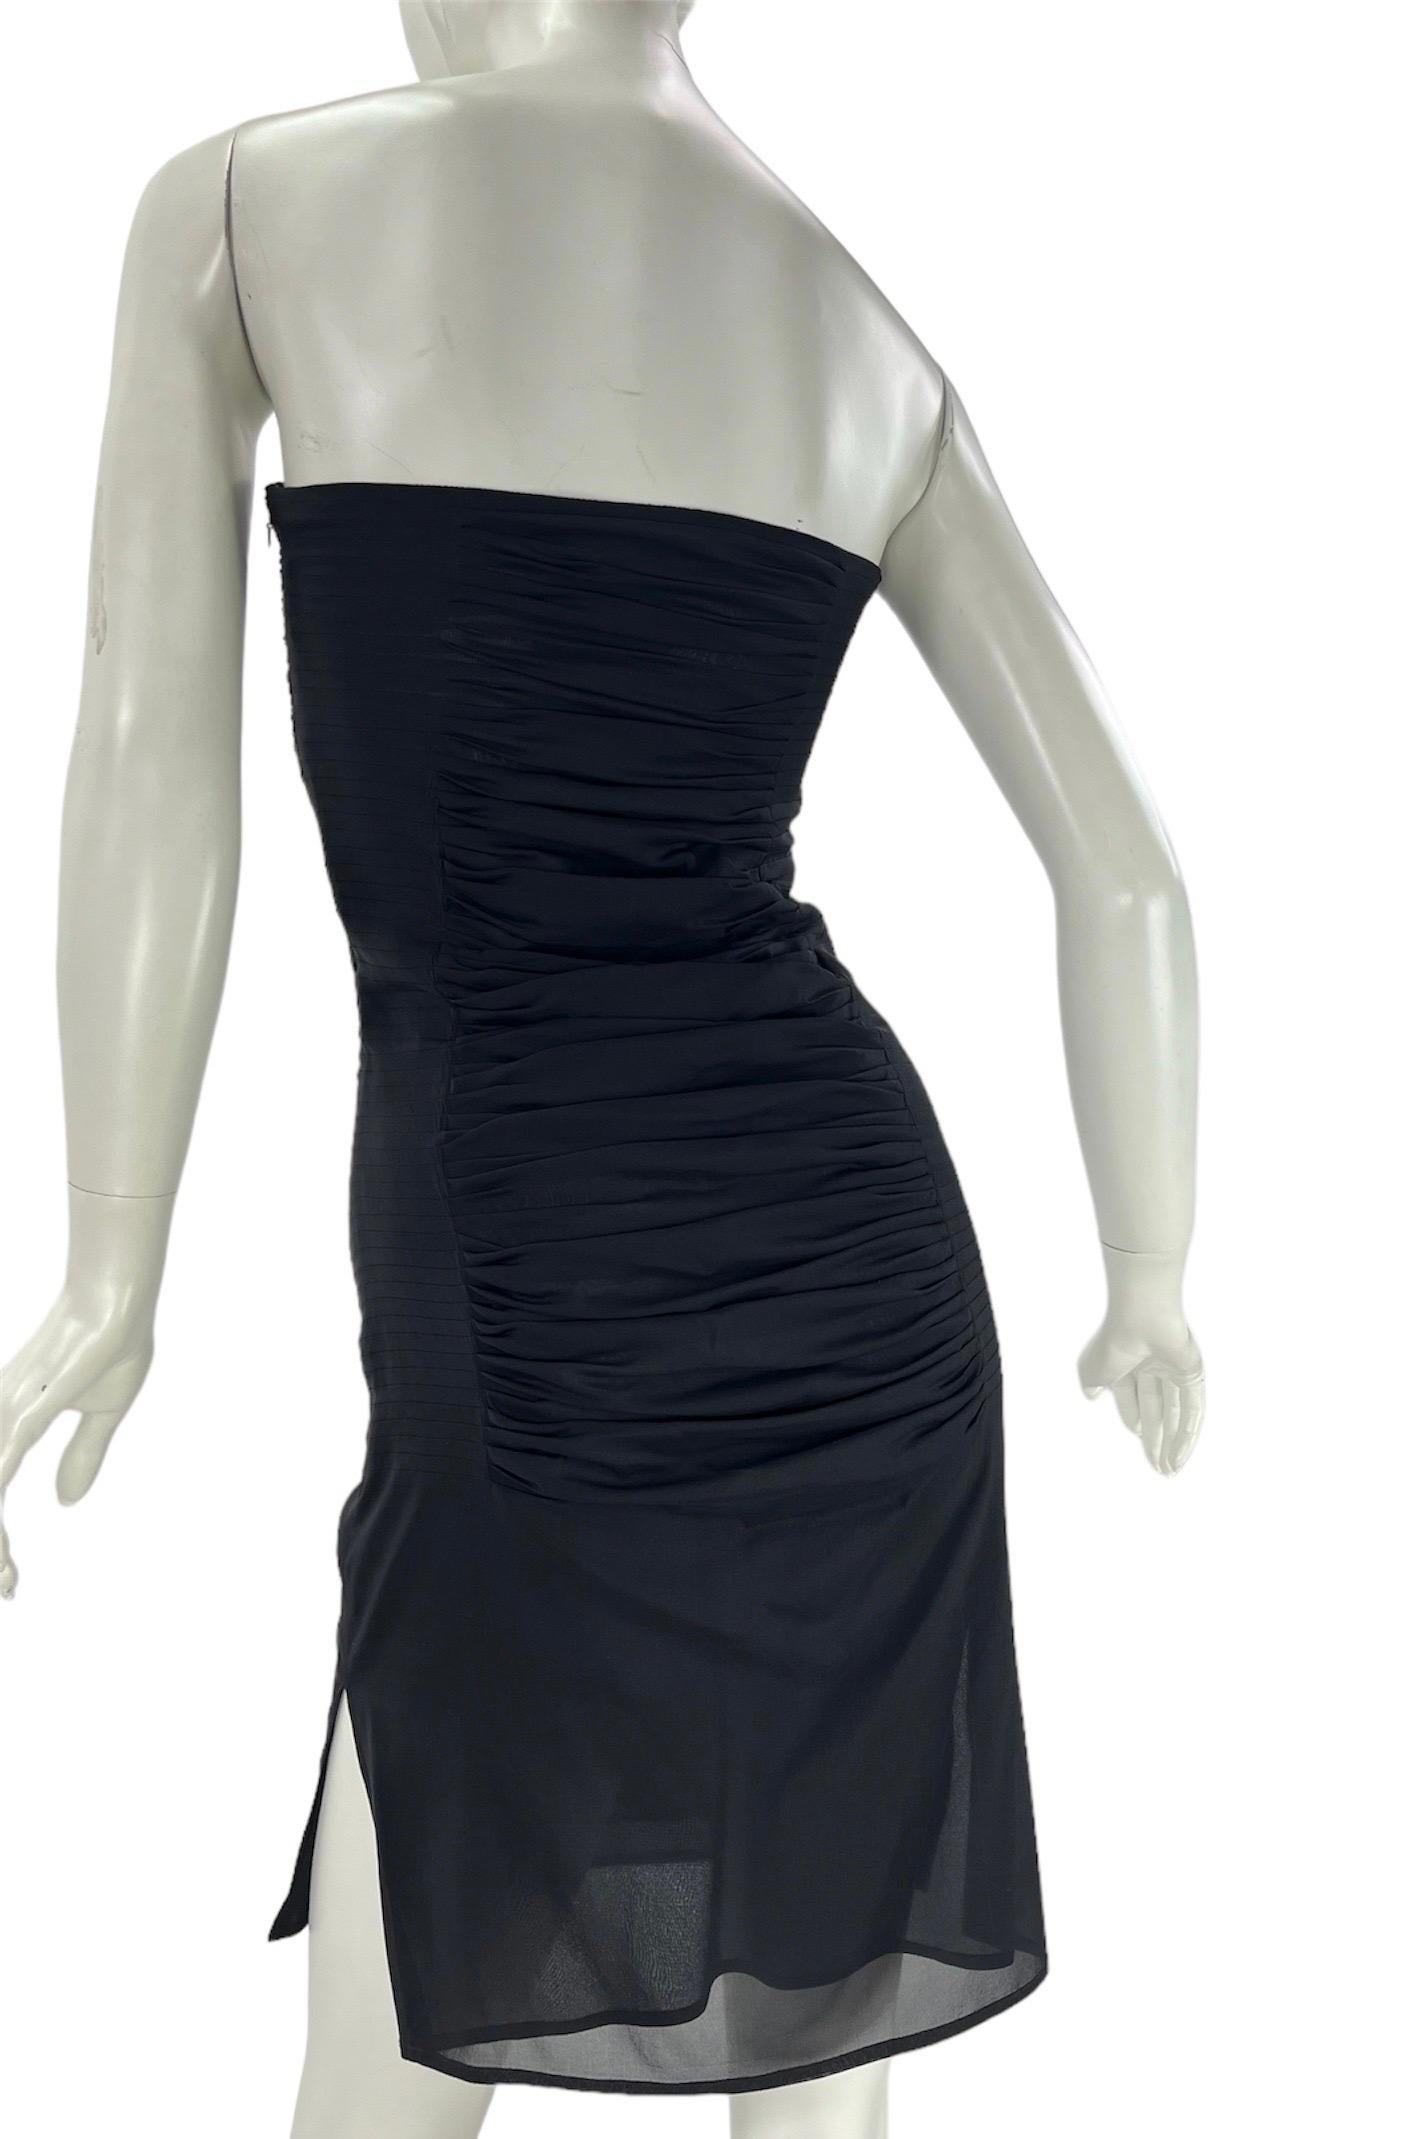 S/S 2001 Vintage Tom Ford for Yves Saint Laurent black silk dress In Excellent Condition For Sale In Montgomery, TX